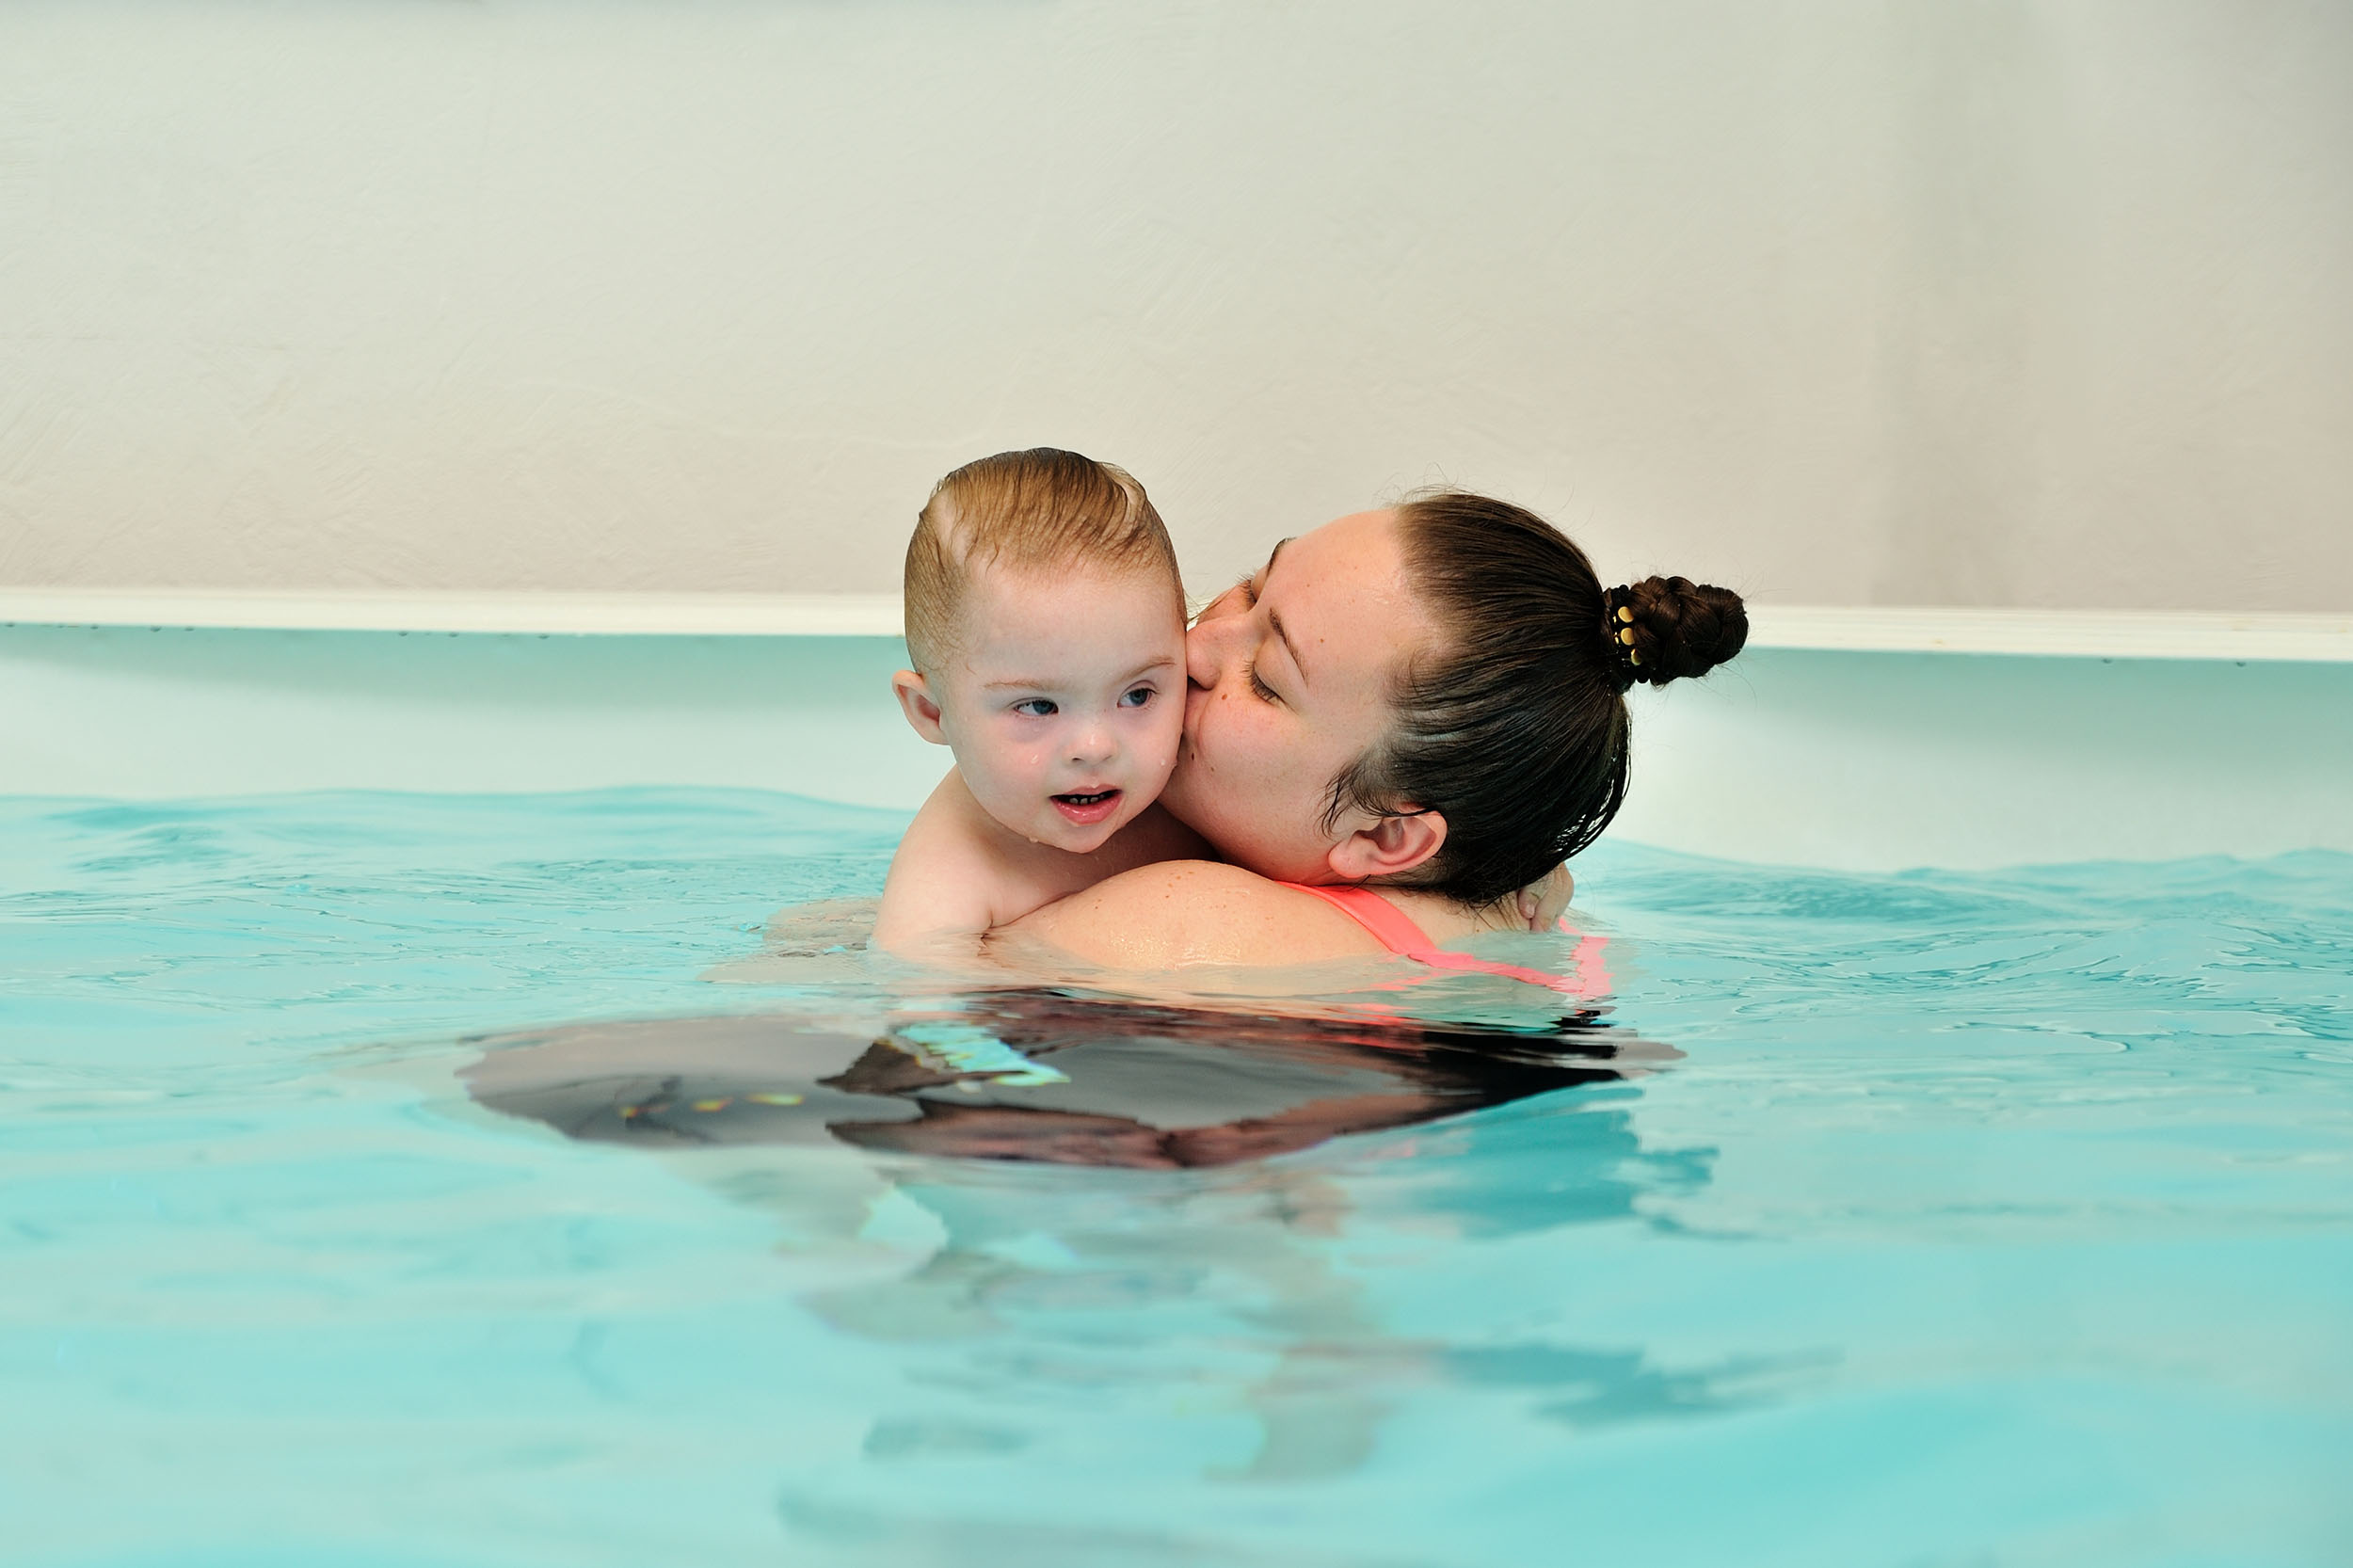 A mother and her child with Down syndrome swim and play in a children’s pool with blue water.